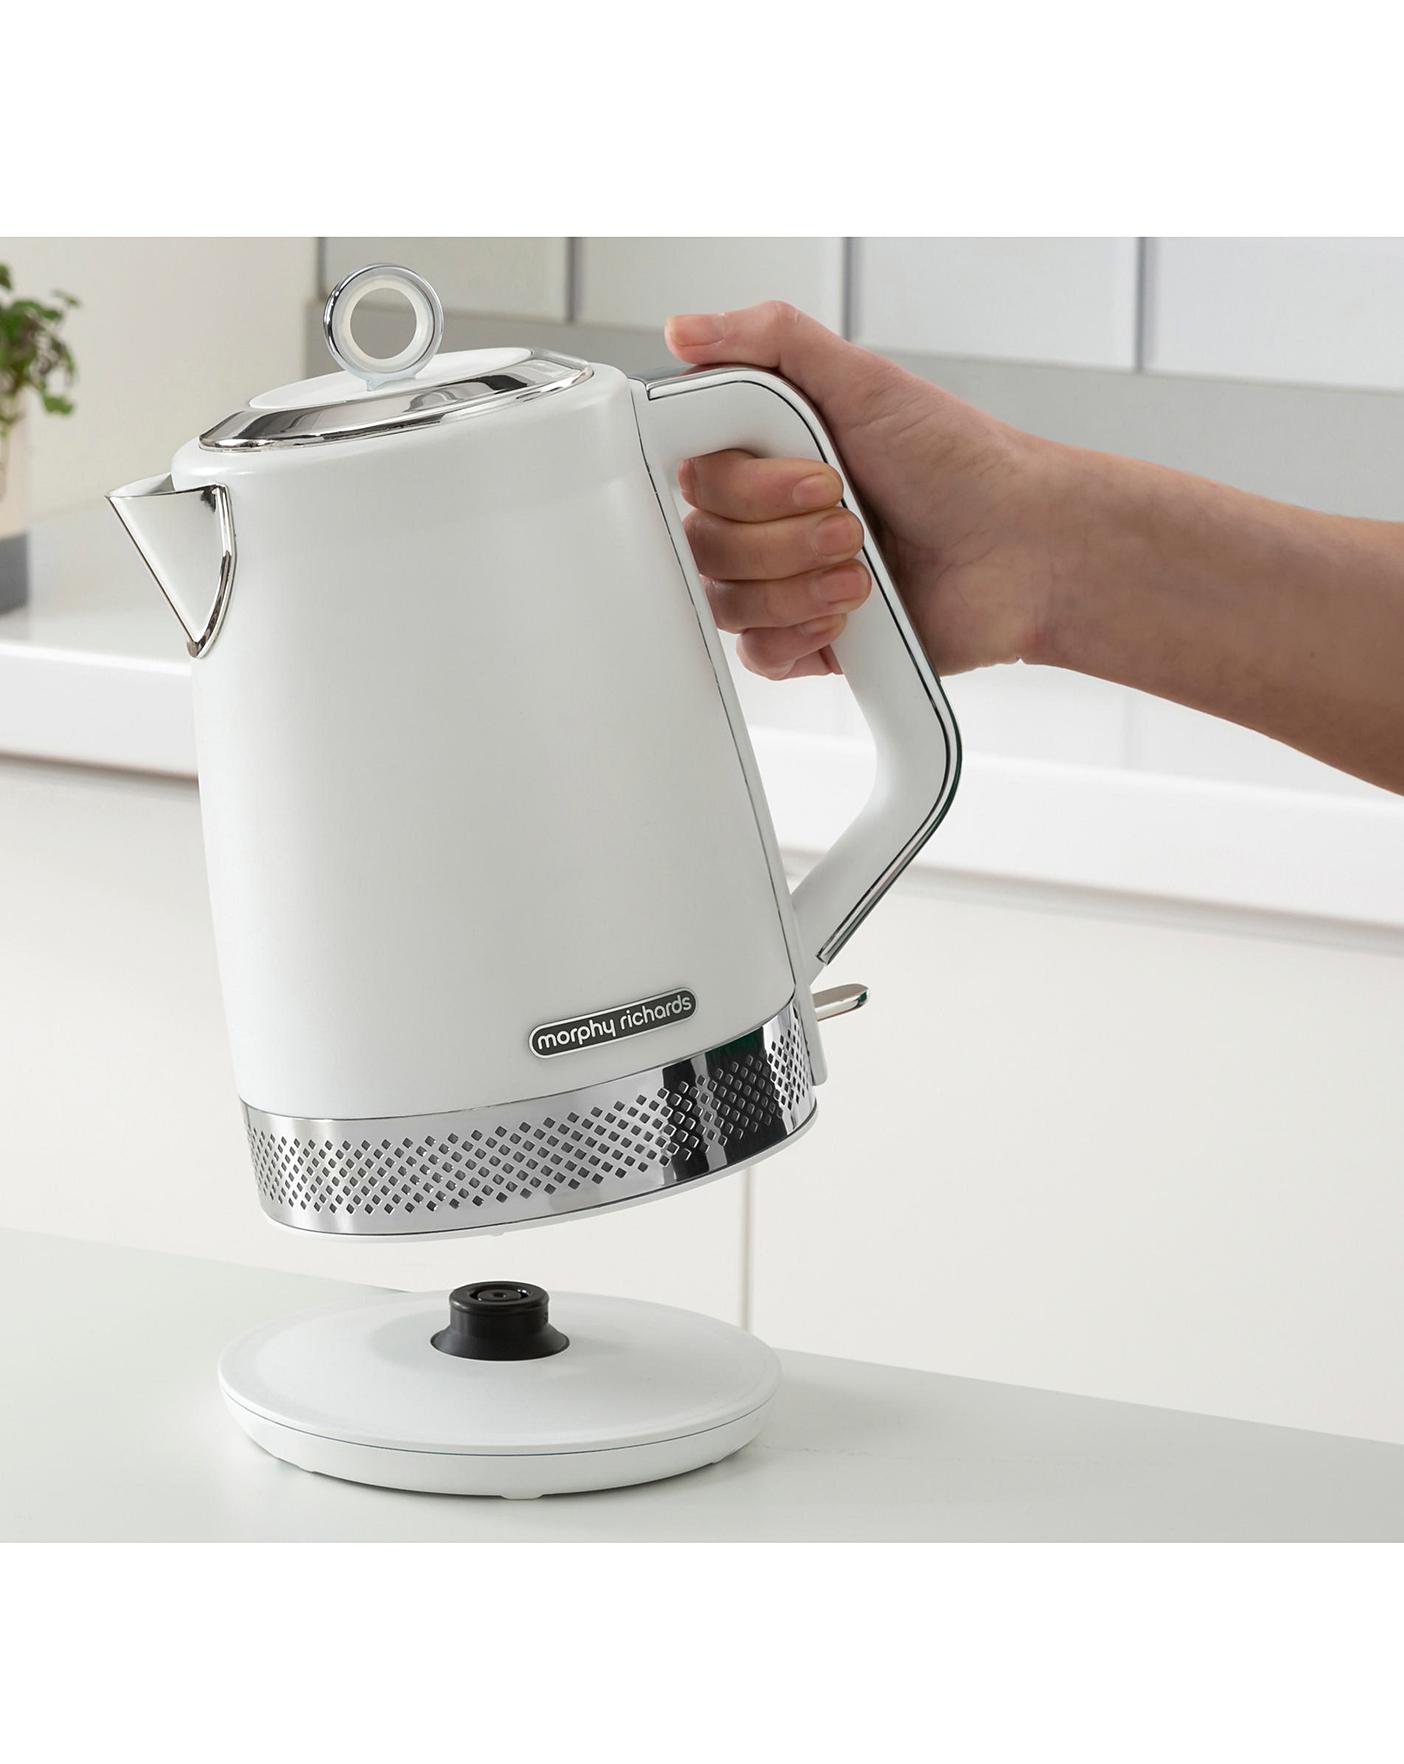 Introducing the Morphy Richards Illumination Kettle - For Perfectly Hot  Drinks Every Time 108021 